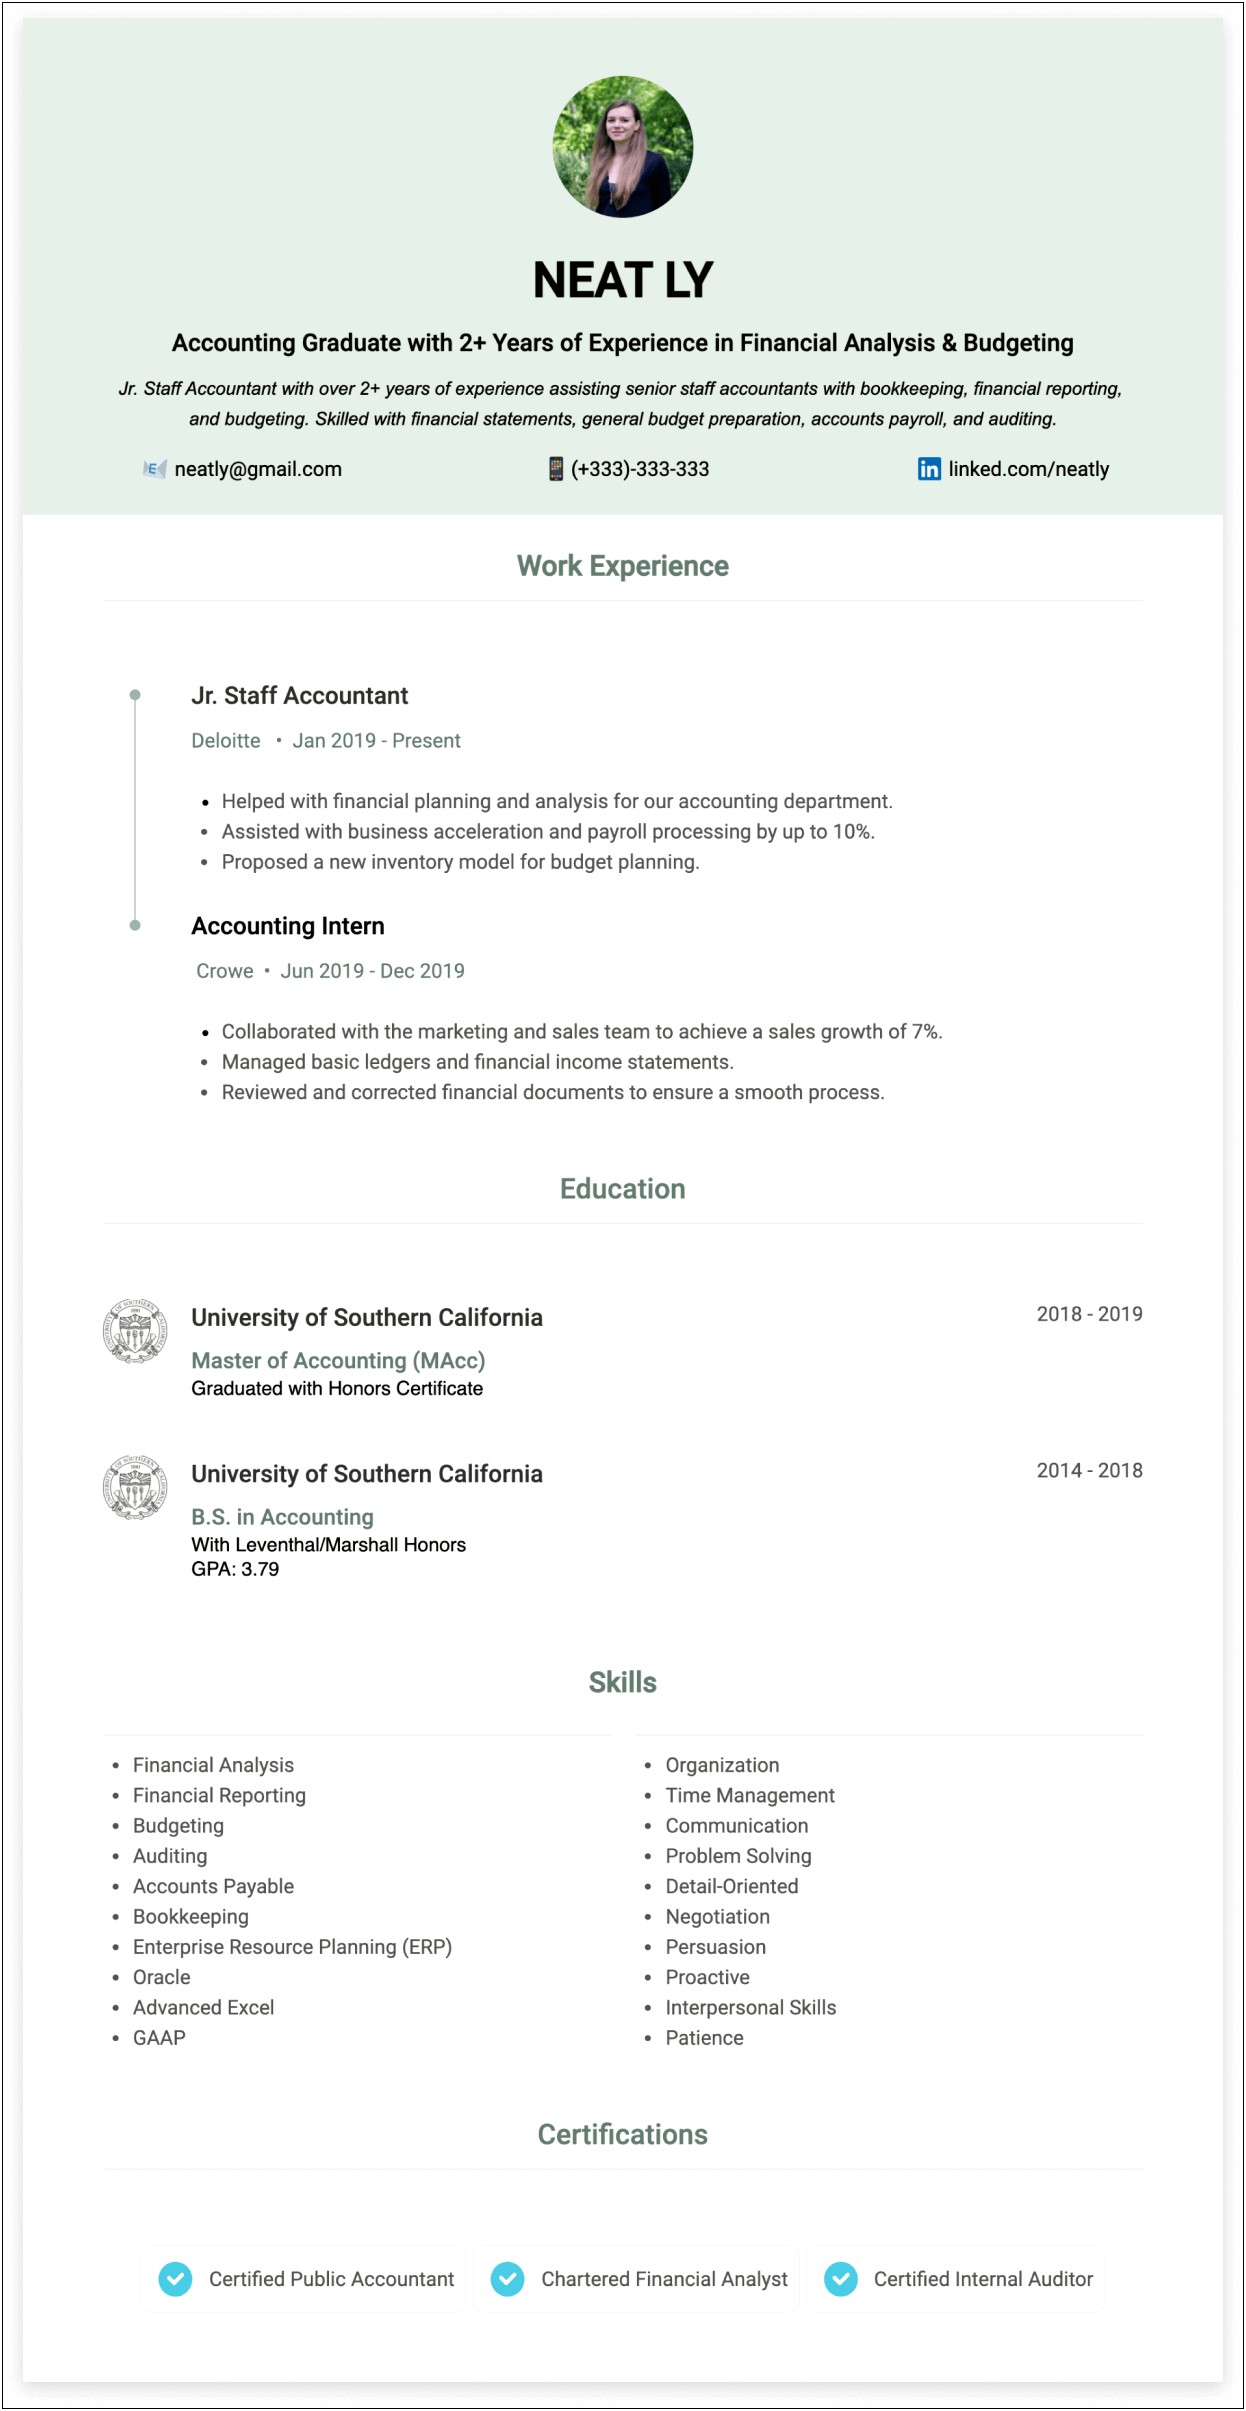 Experience Resume Format For Junior Accountant